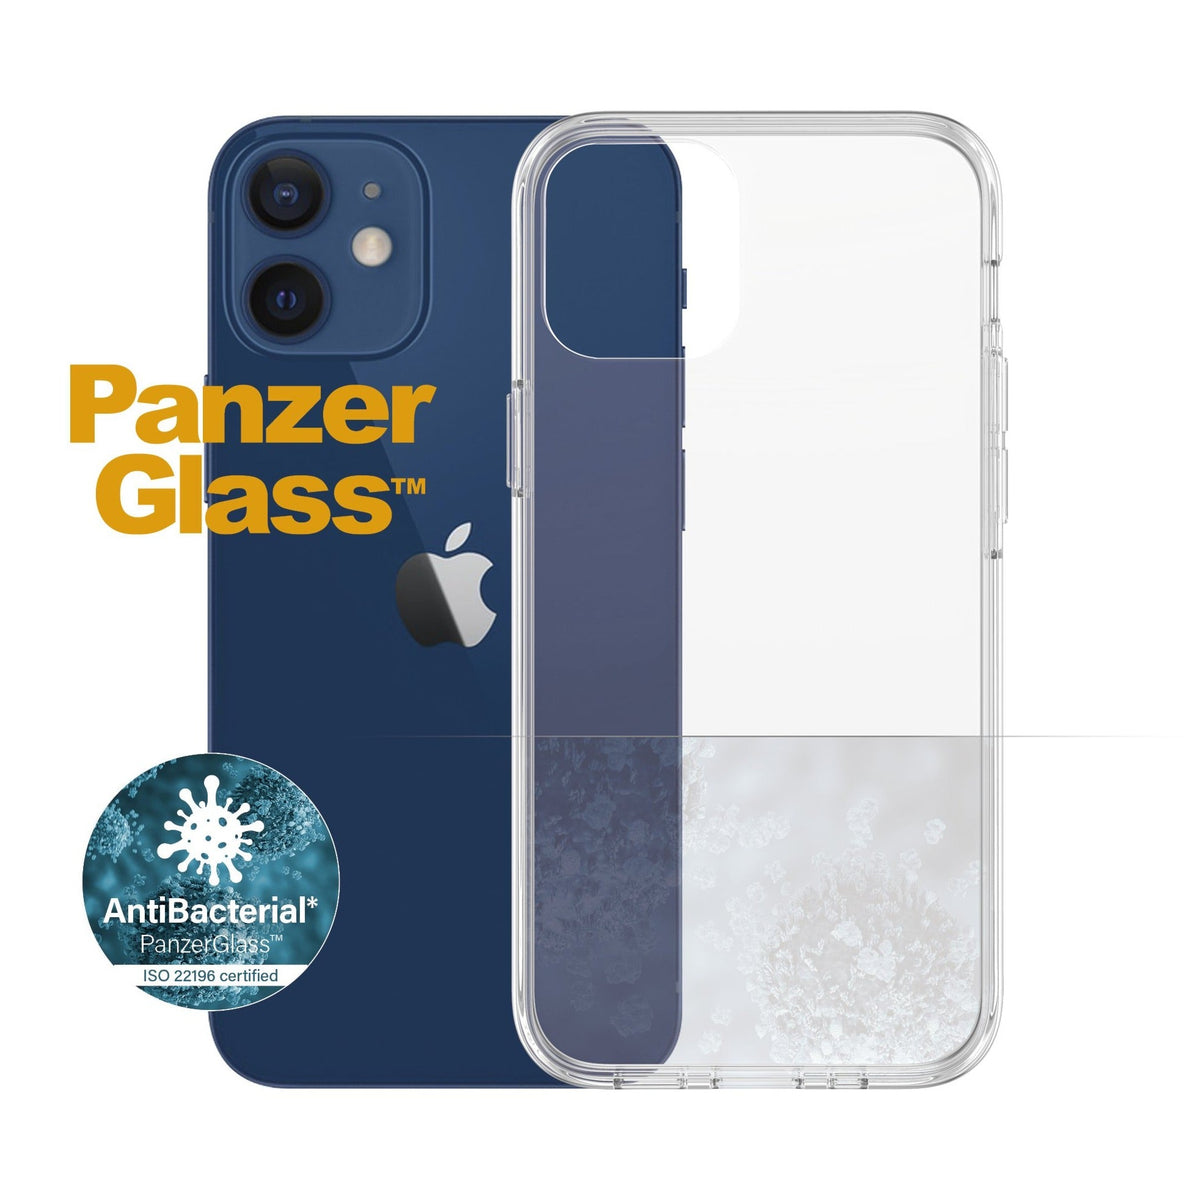 [OPEN BOX] PANZERGLASS iPhone 12 Mini - Clear Case Drop Protection Treated w/Anti-Microbial